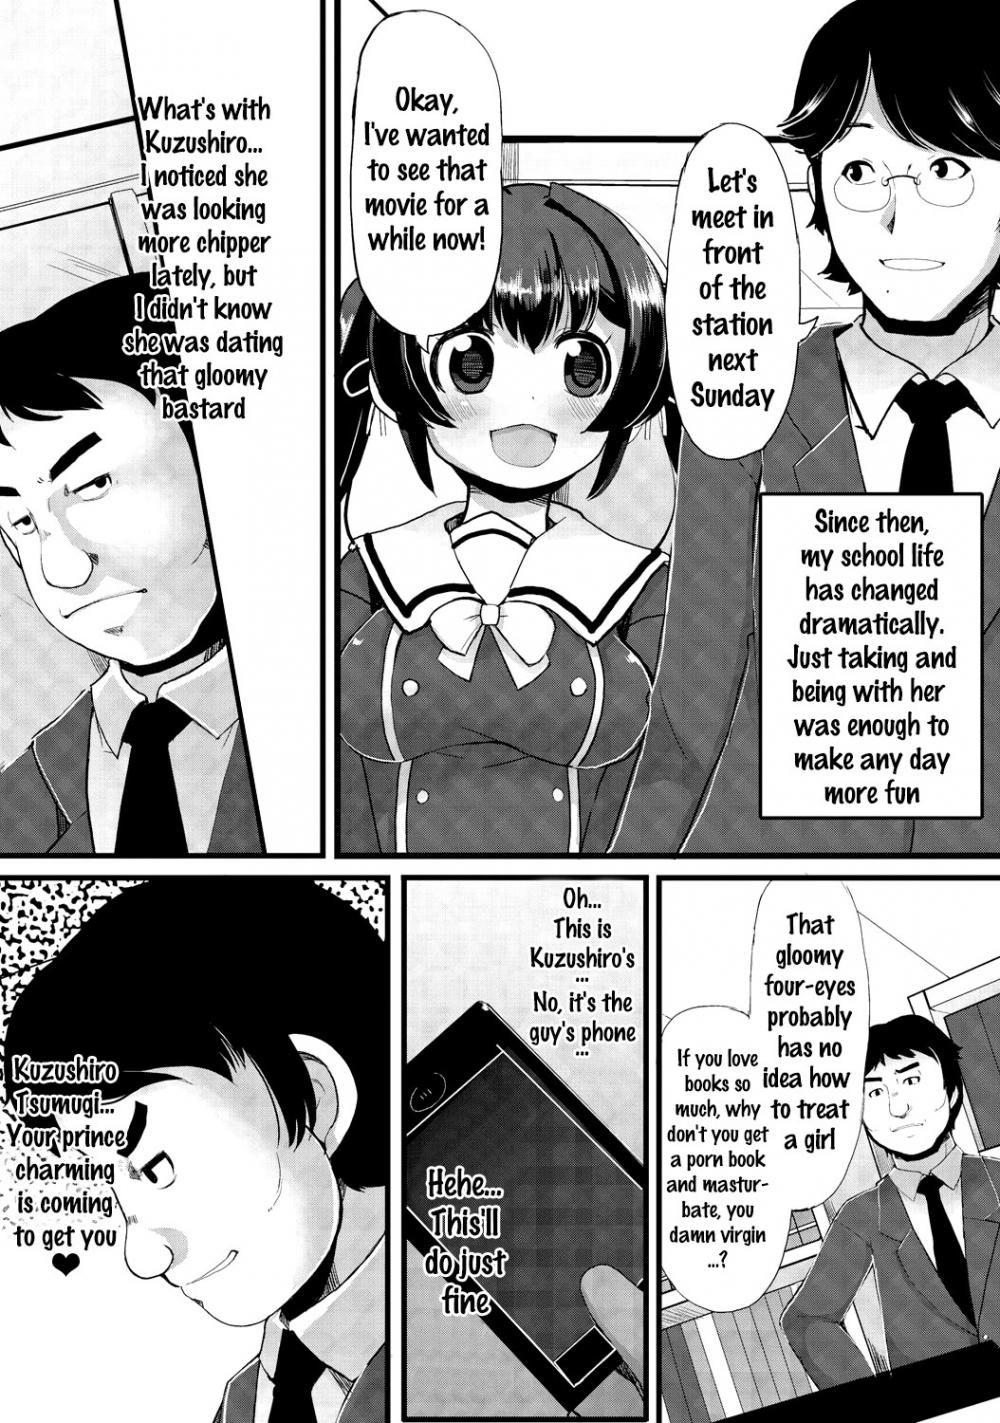 Hentai Manga Comic-A Large Breasted Honor Student Makes The Big Change to Perverted Masochist-Chapter 3-2